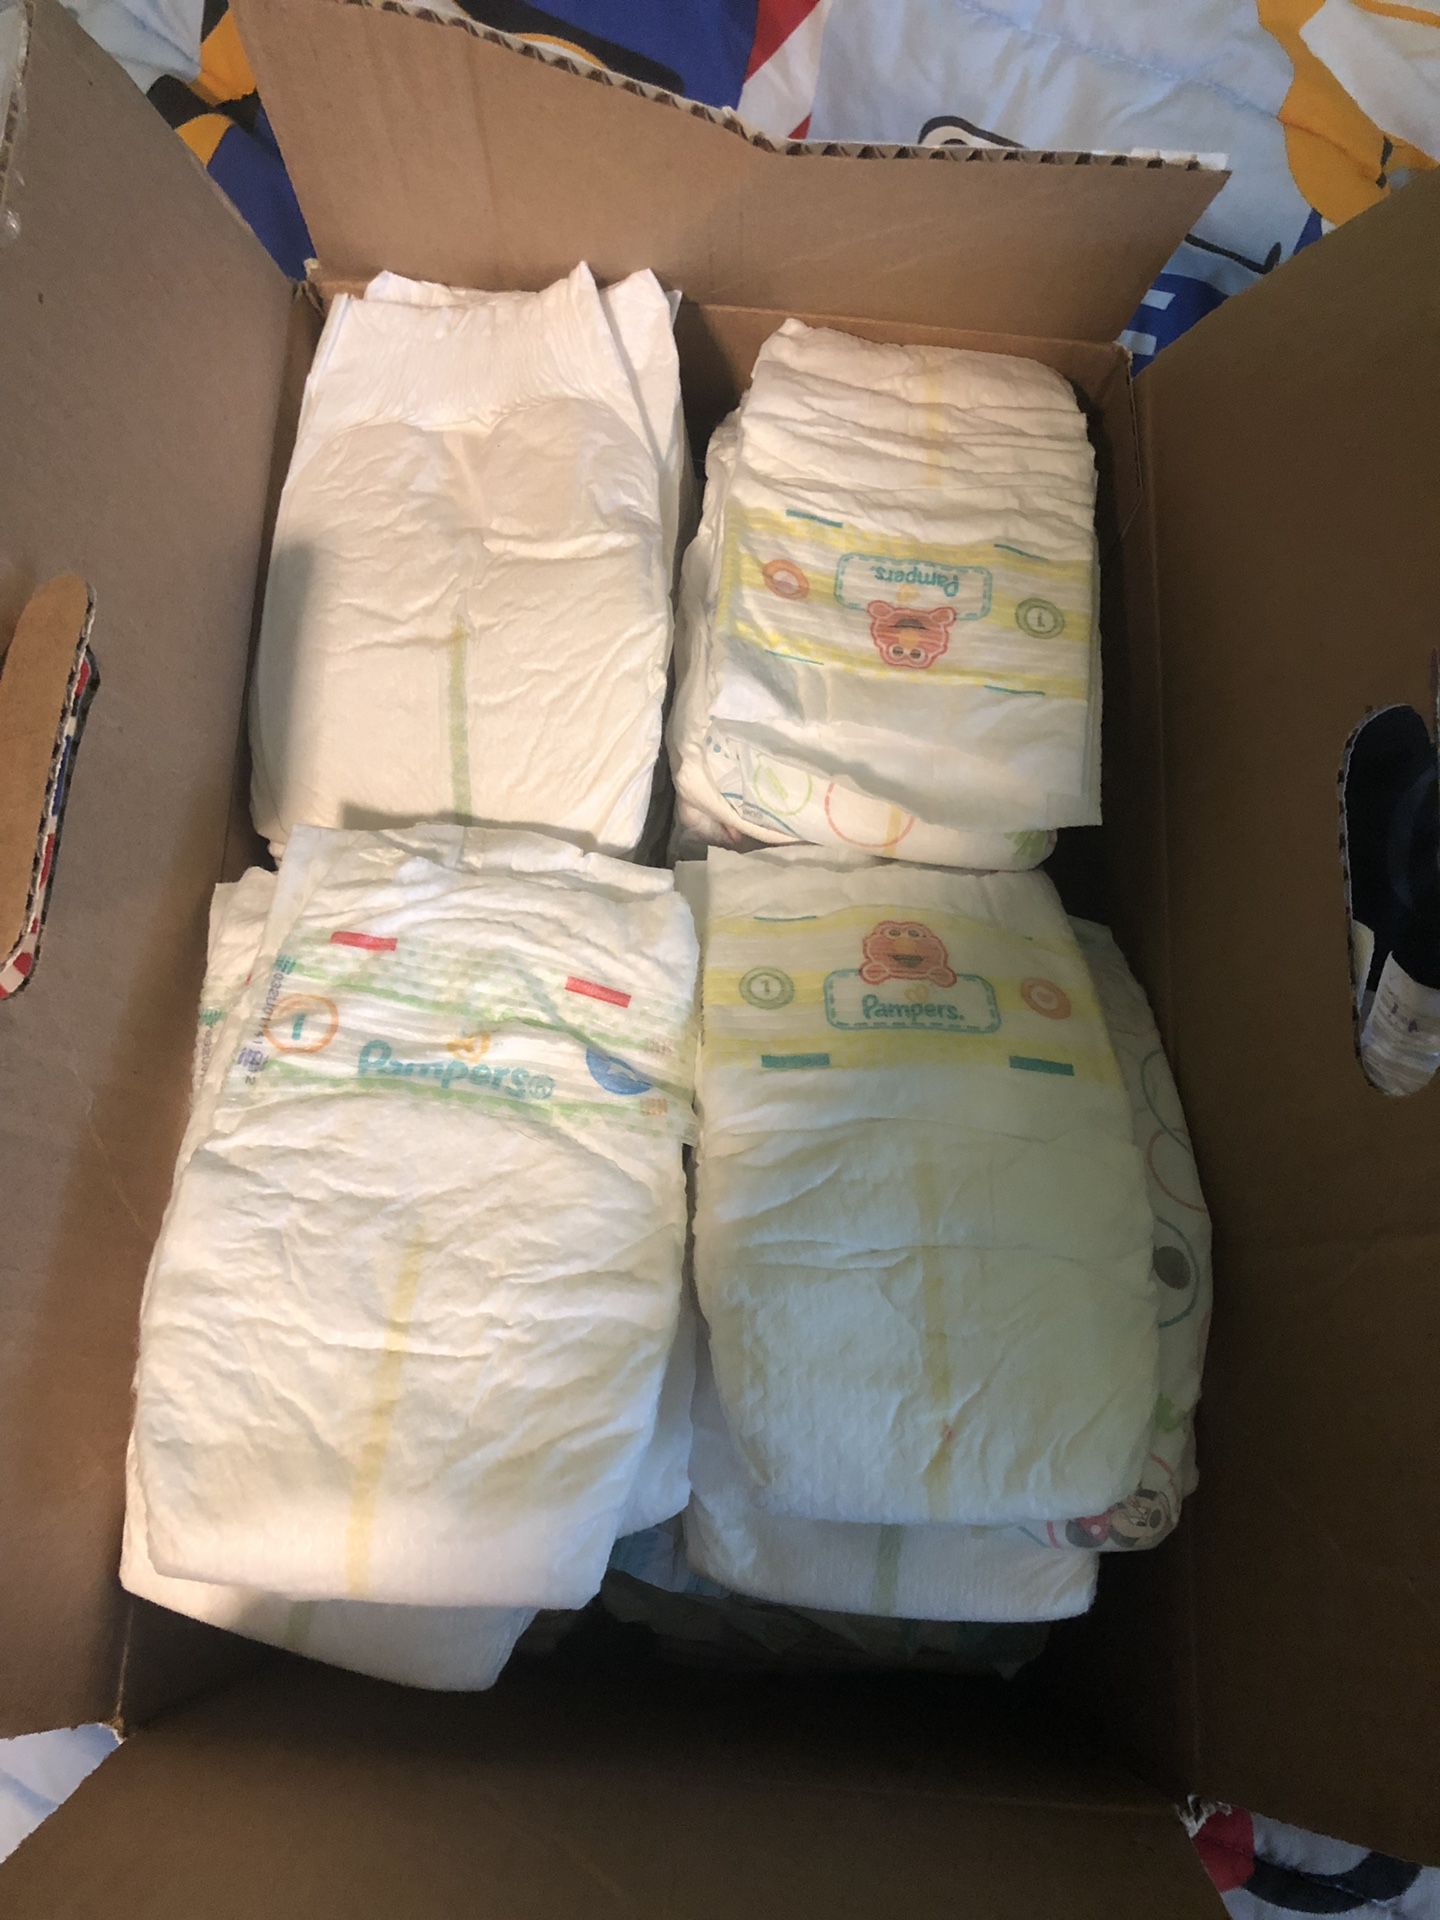 Huggies and pampers diapers, size 1 and N